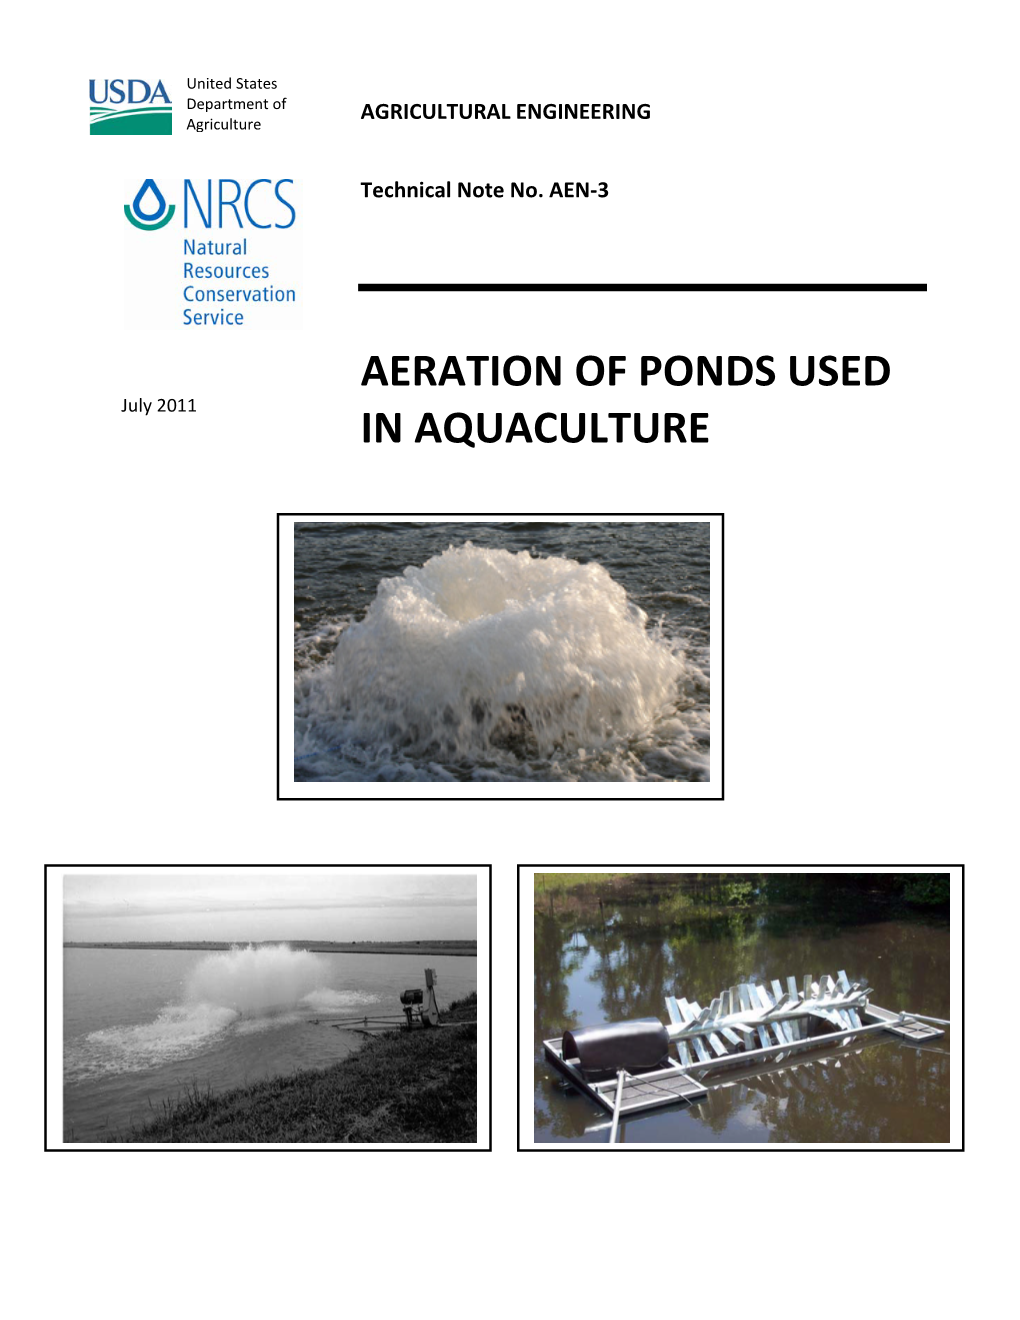 Aeration of Ponds Used in Aquaculture